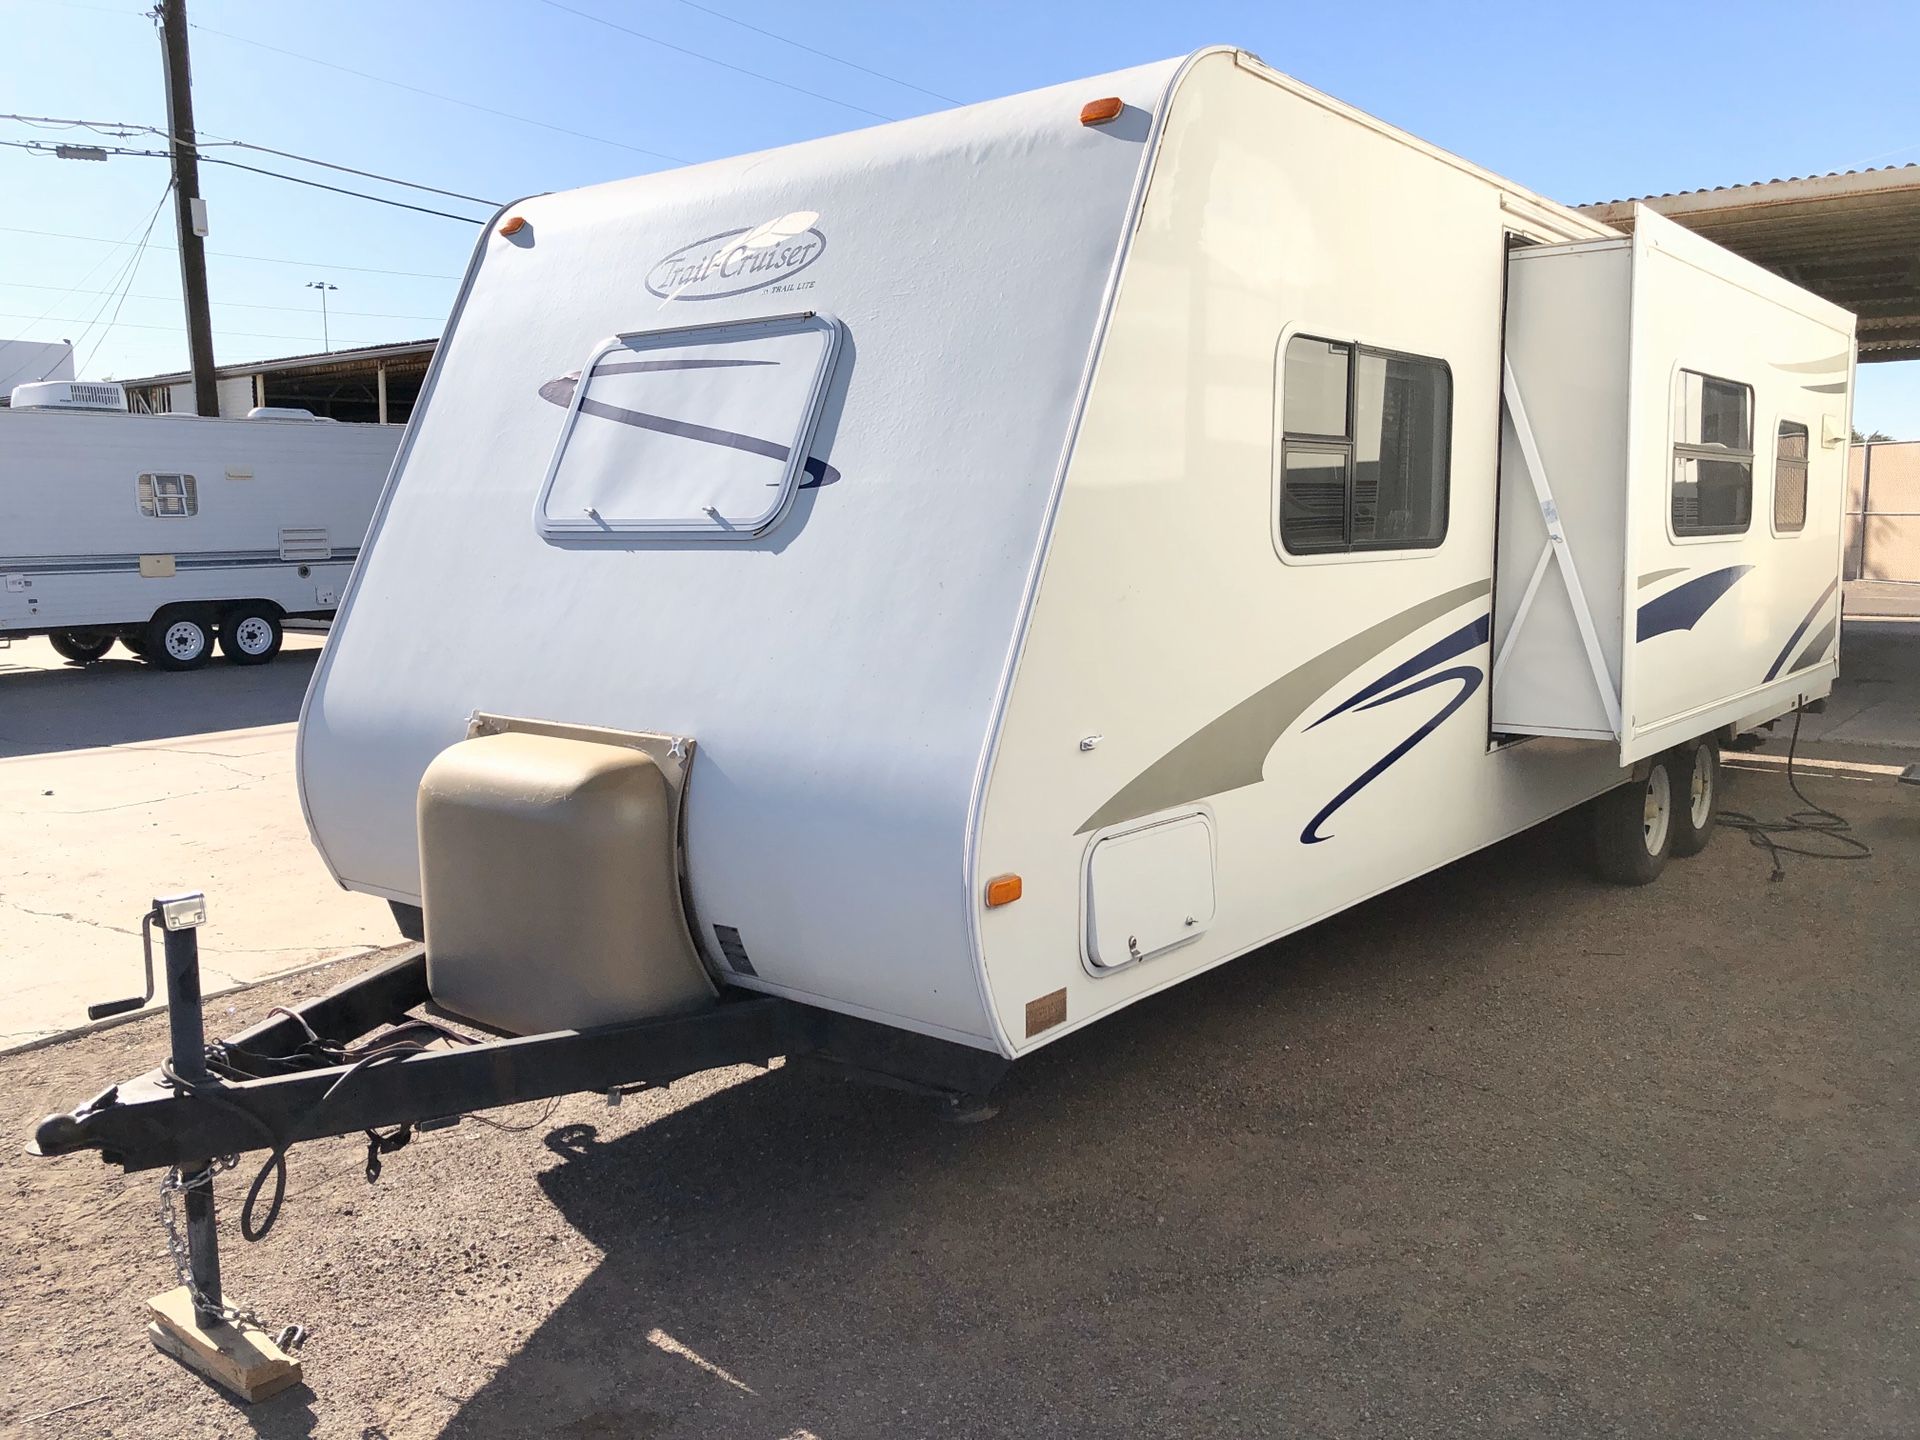 2007 Trail-Cruiser bunkhouse with slide